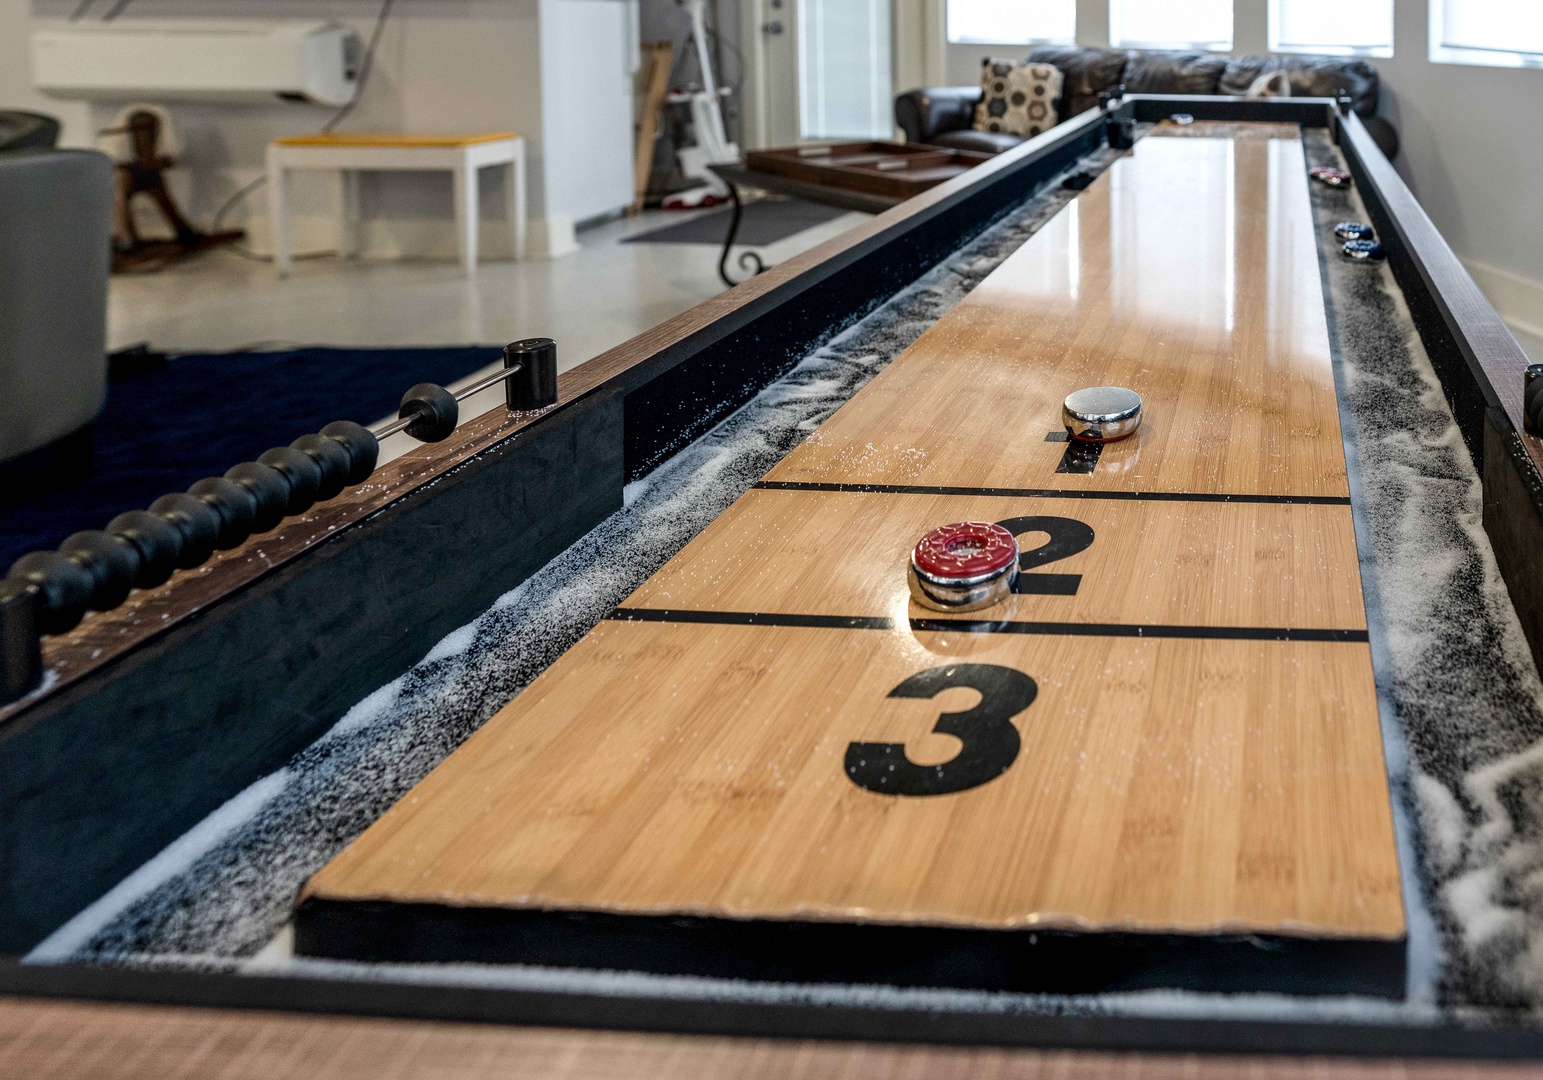 Challenge friends to a shuffleboard match in the game room #GameOn